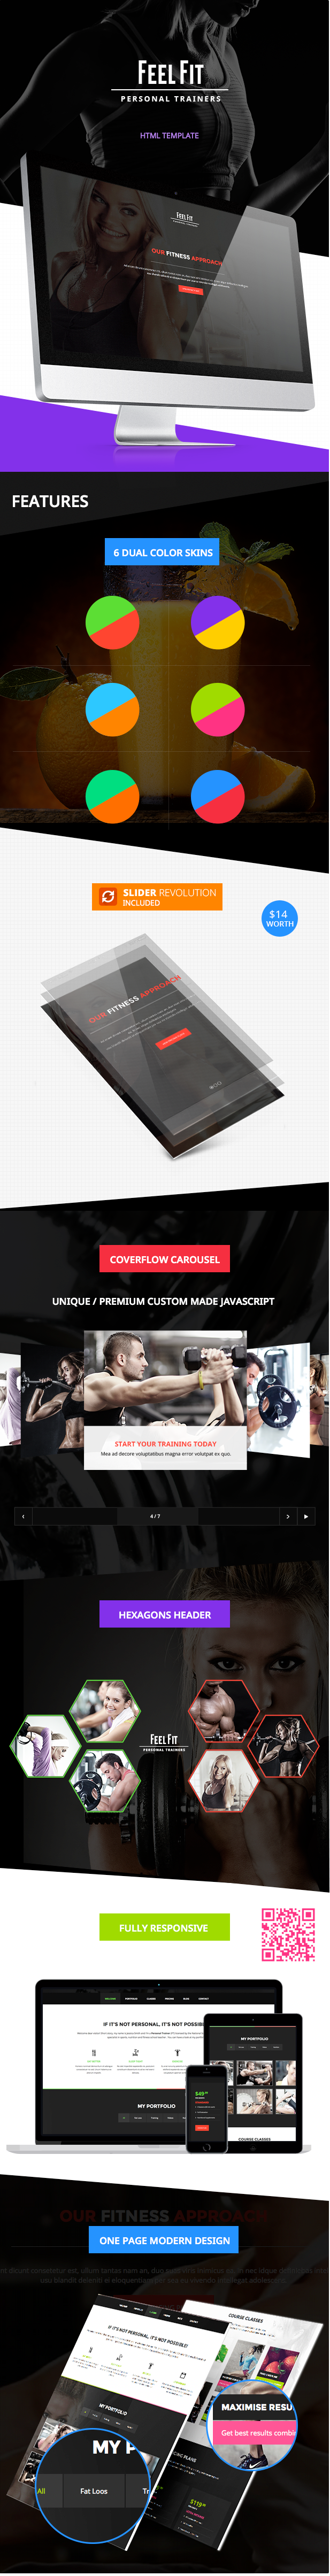 Personal Trainer - One Page HTML5 Template - 3